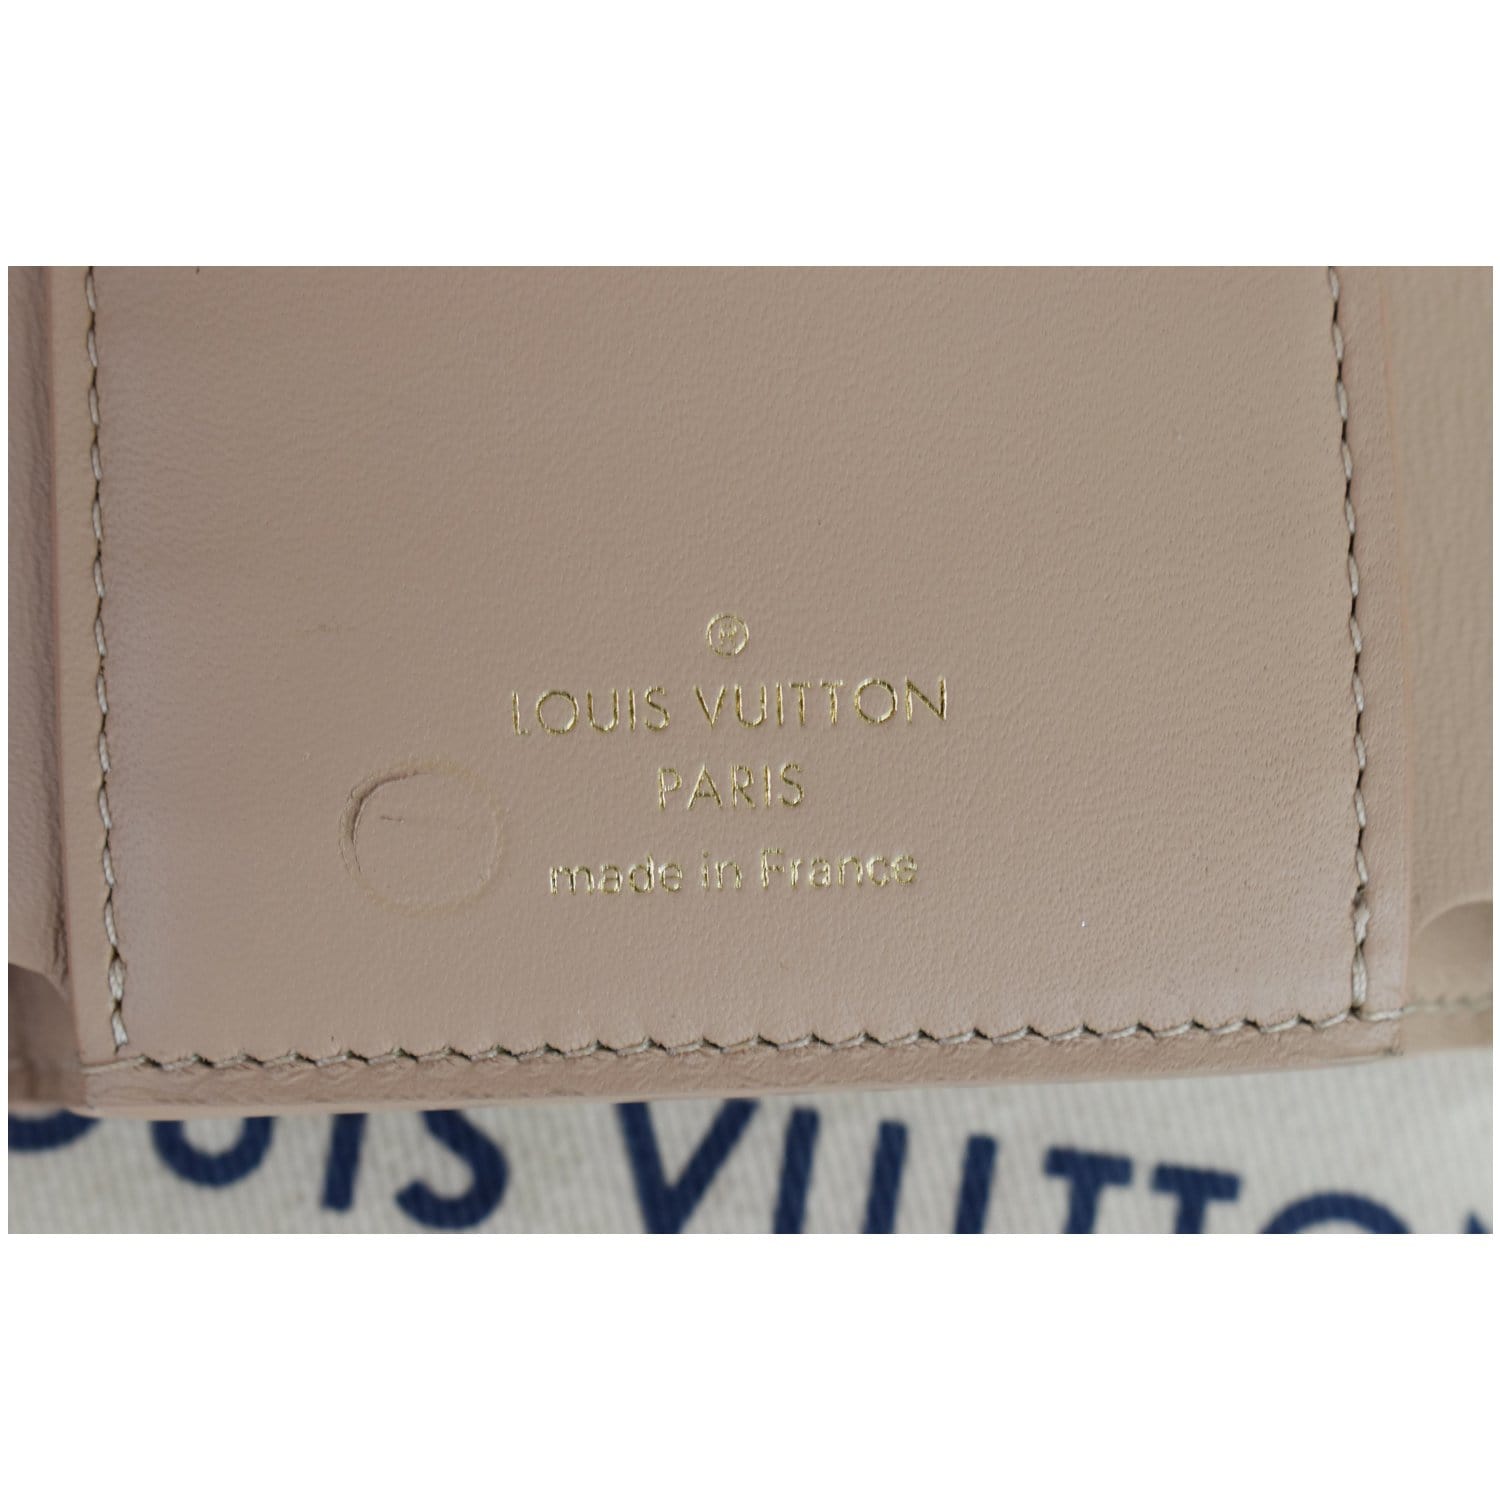 LOUIS VUITTON Capucines Studded Compact Leather Wallet Peach Last Call